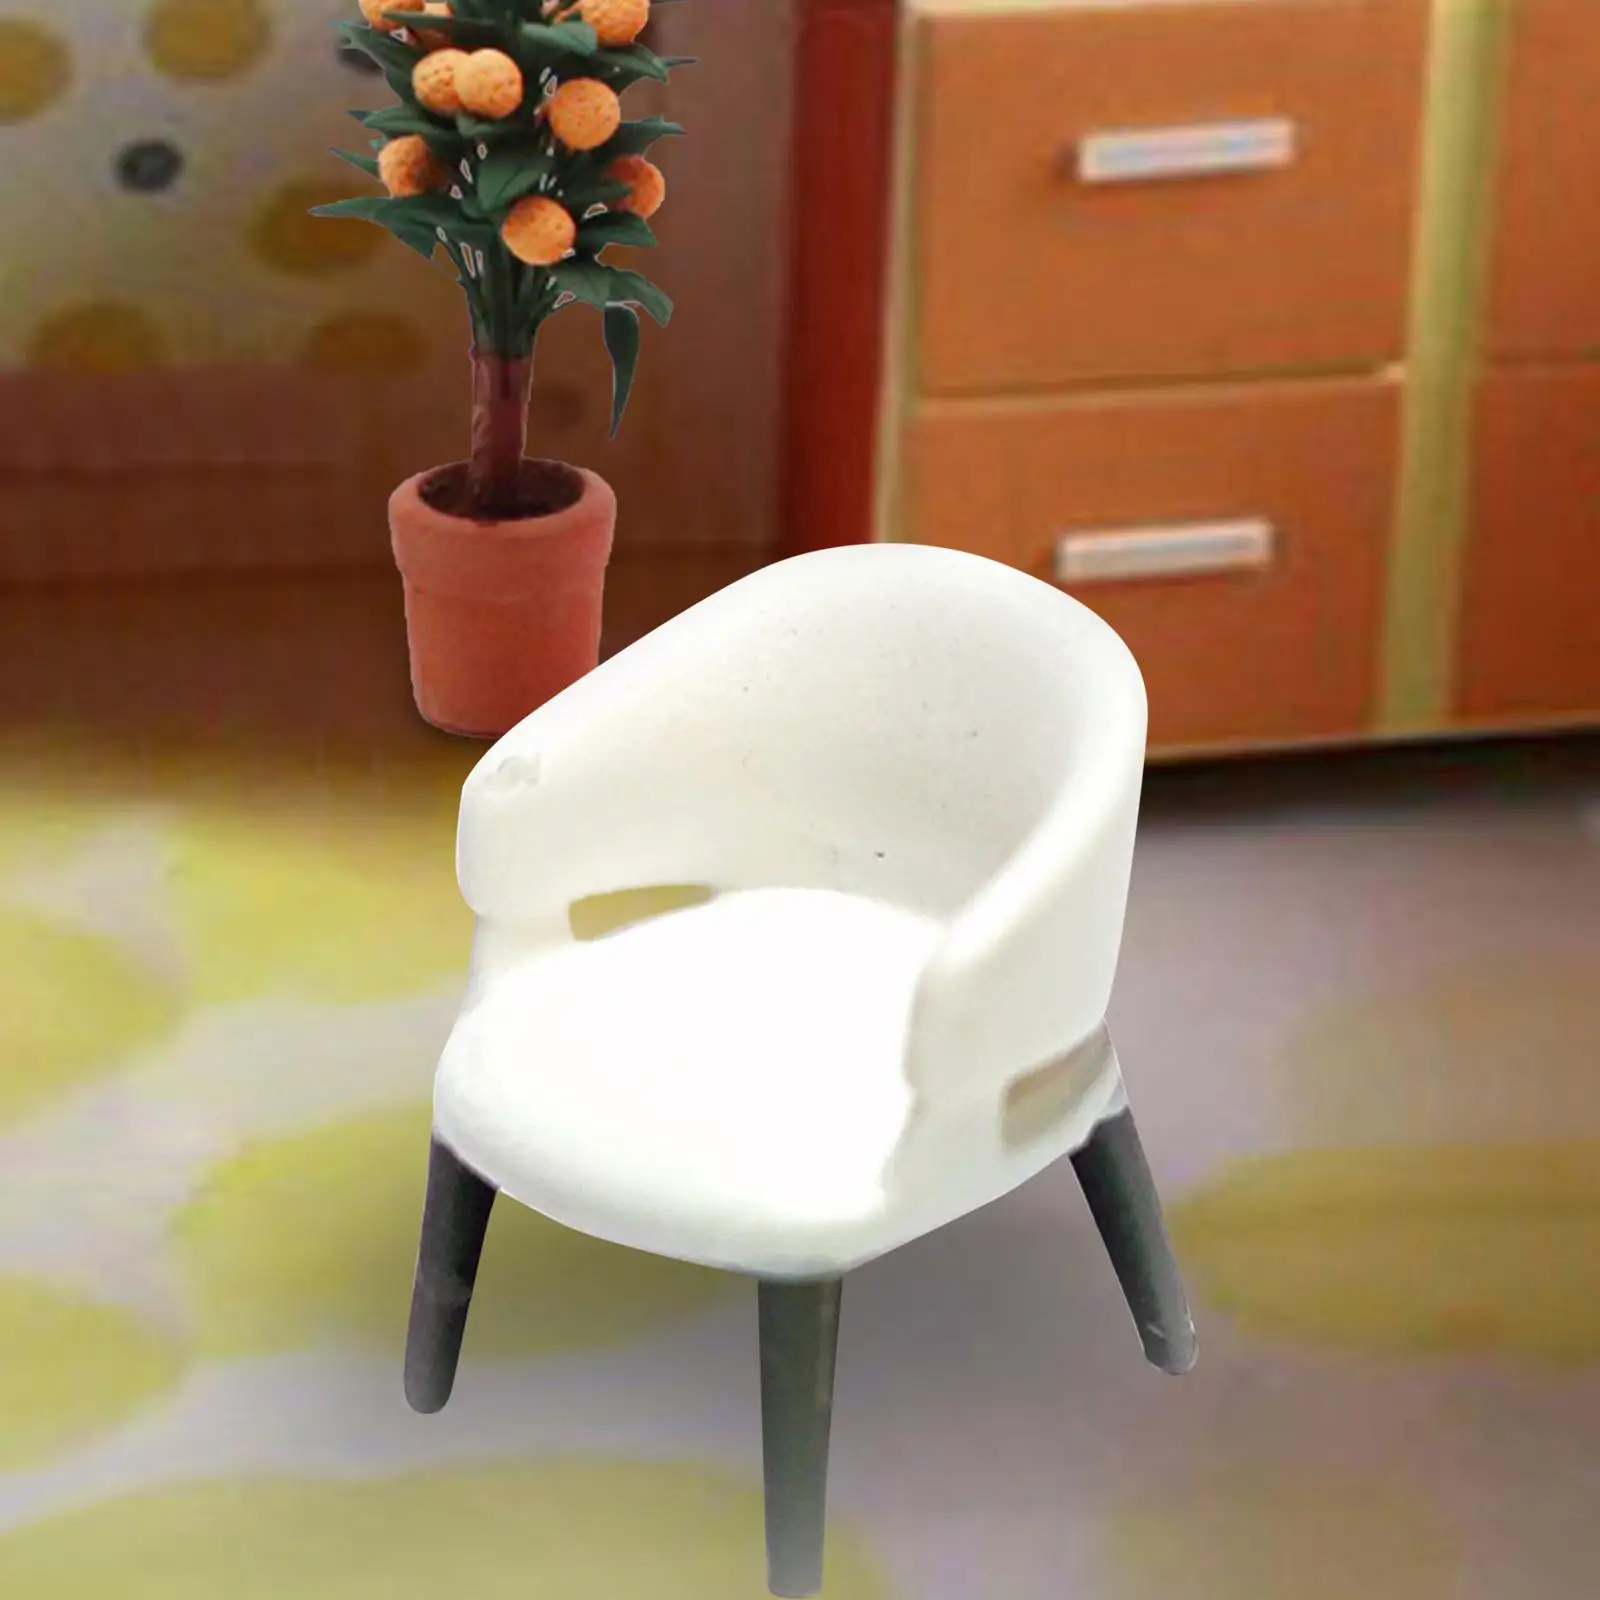 1/87 Scale Chair Model Simulation Figure Realistic Resin Miniature 1/87 Scale Armchair for Dollhouse Decor Photo Prop